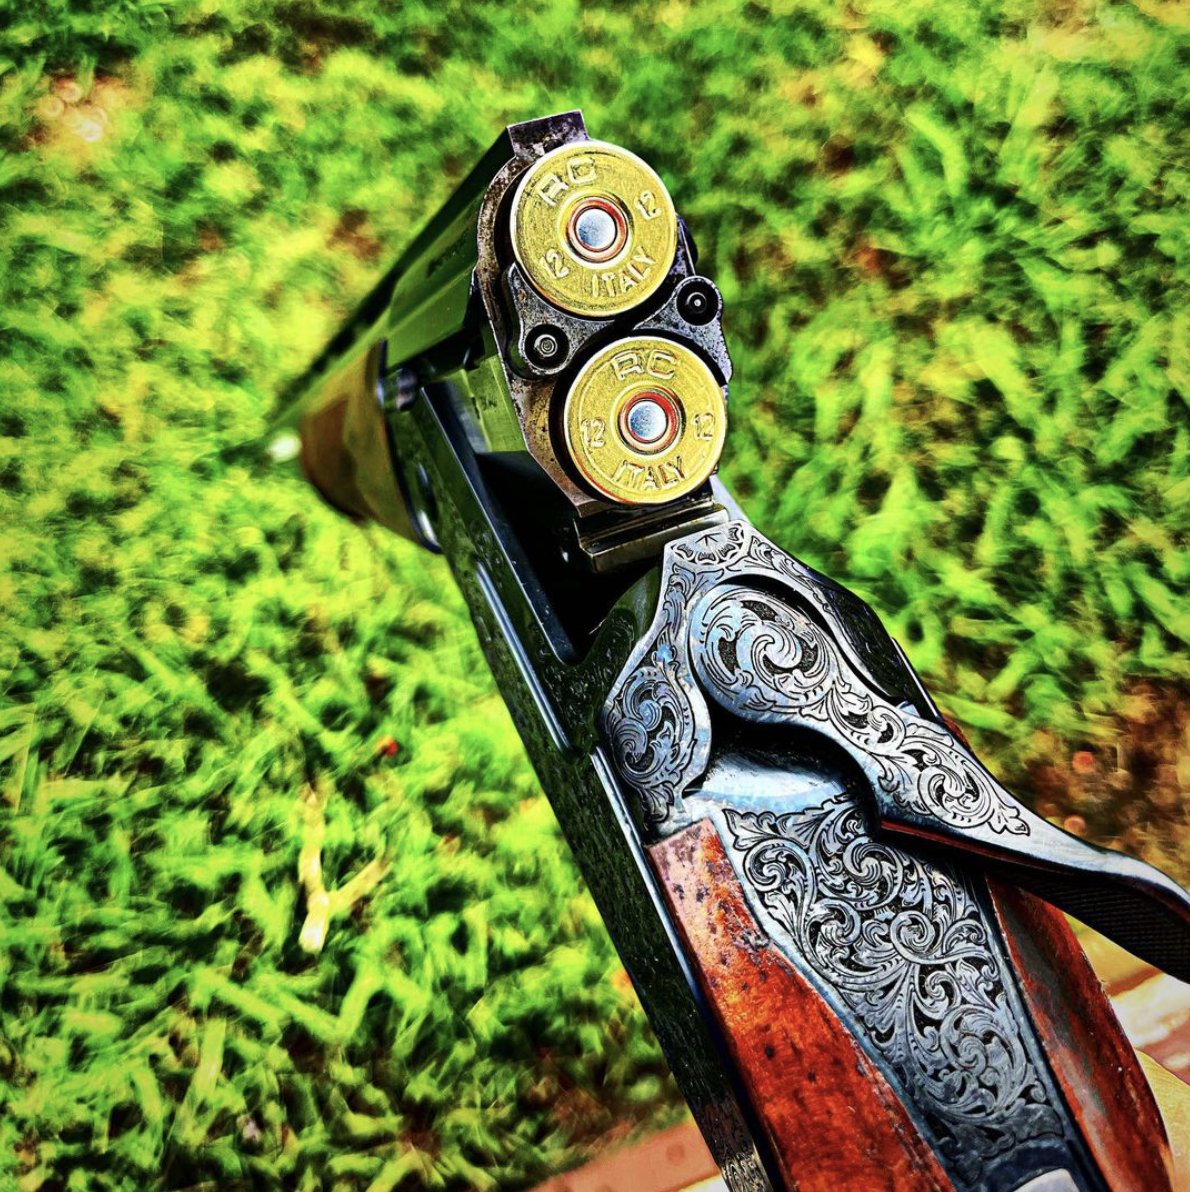 Beautiful companion for a day at the clays course.

📷: @clay_shooters_supply
#blaserusa #blaser #blaserf3 #clayshooting #clayshooters #shotguns #breakingclays #dreamgun #scrollwork #engraving